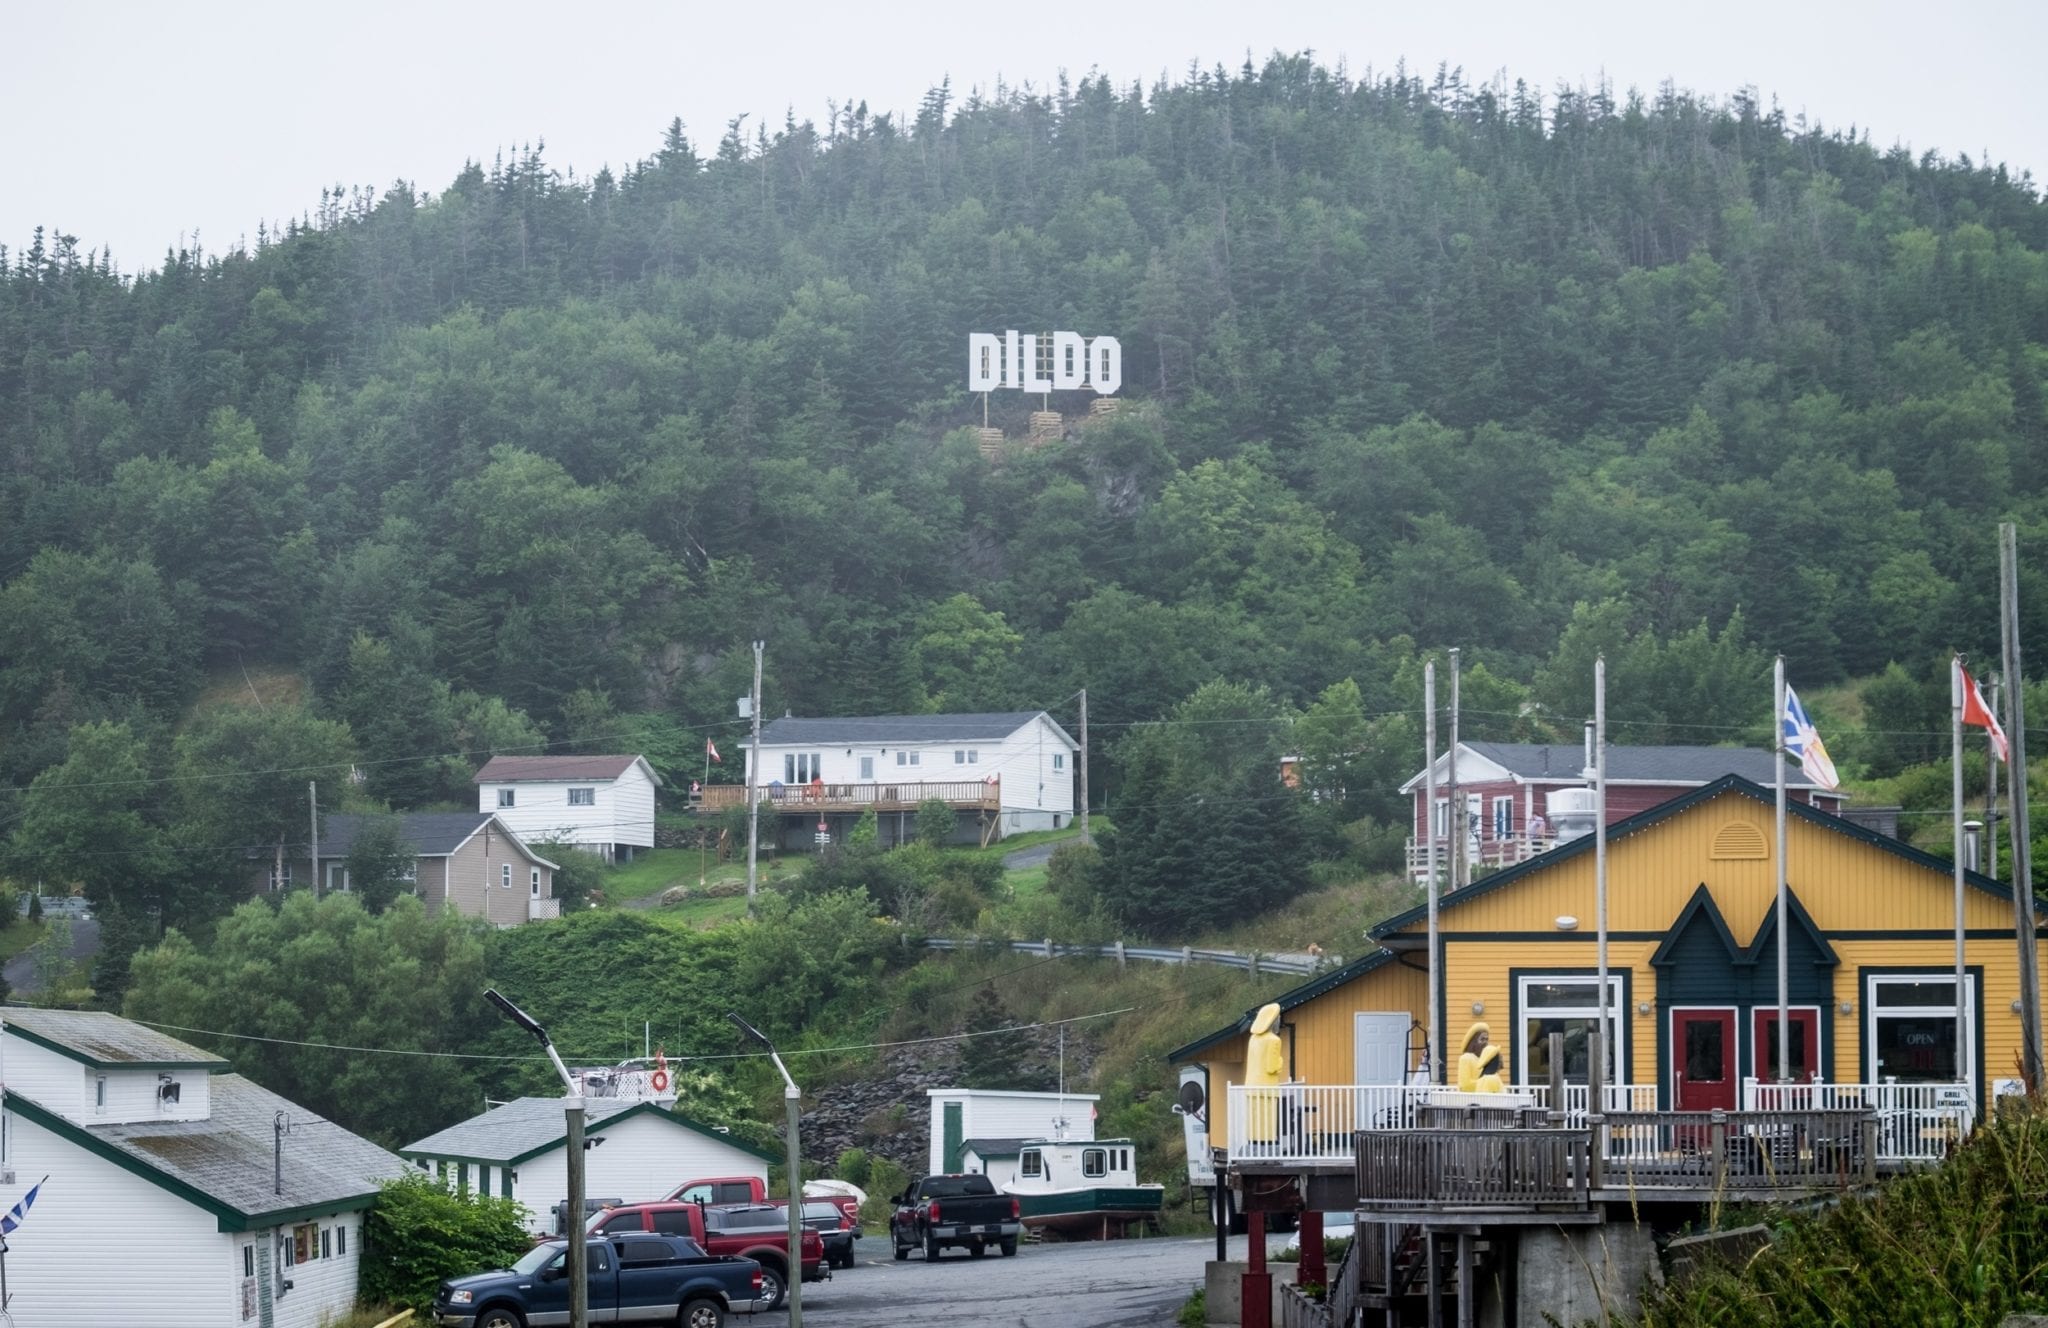 A Hollywood-style sign reading "Dildo" in the hills above the fishing village of Dildo, Newfoundland.